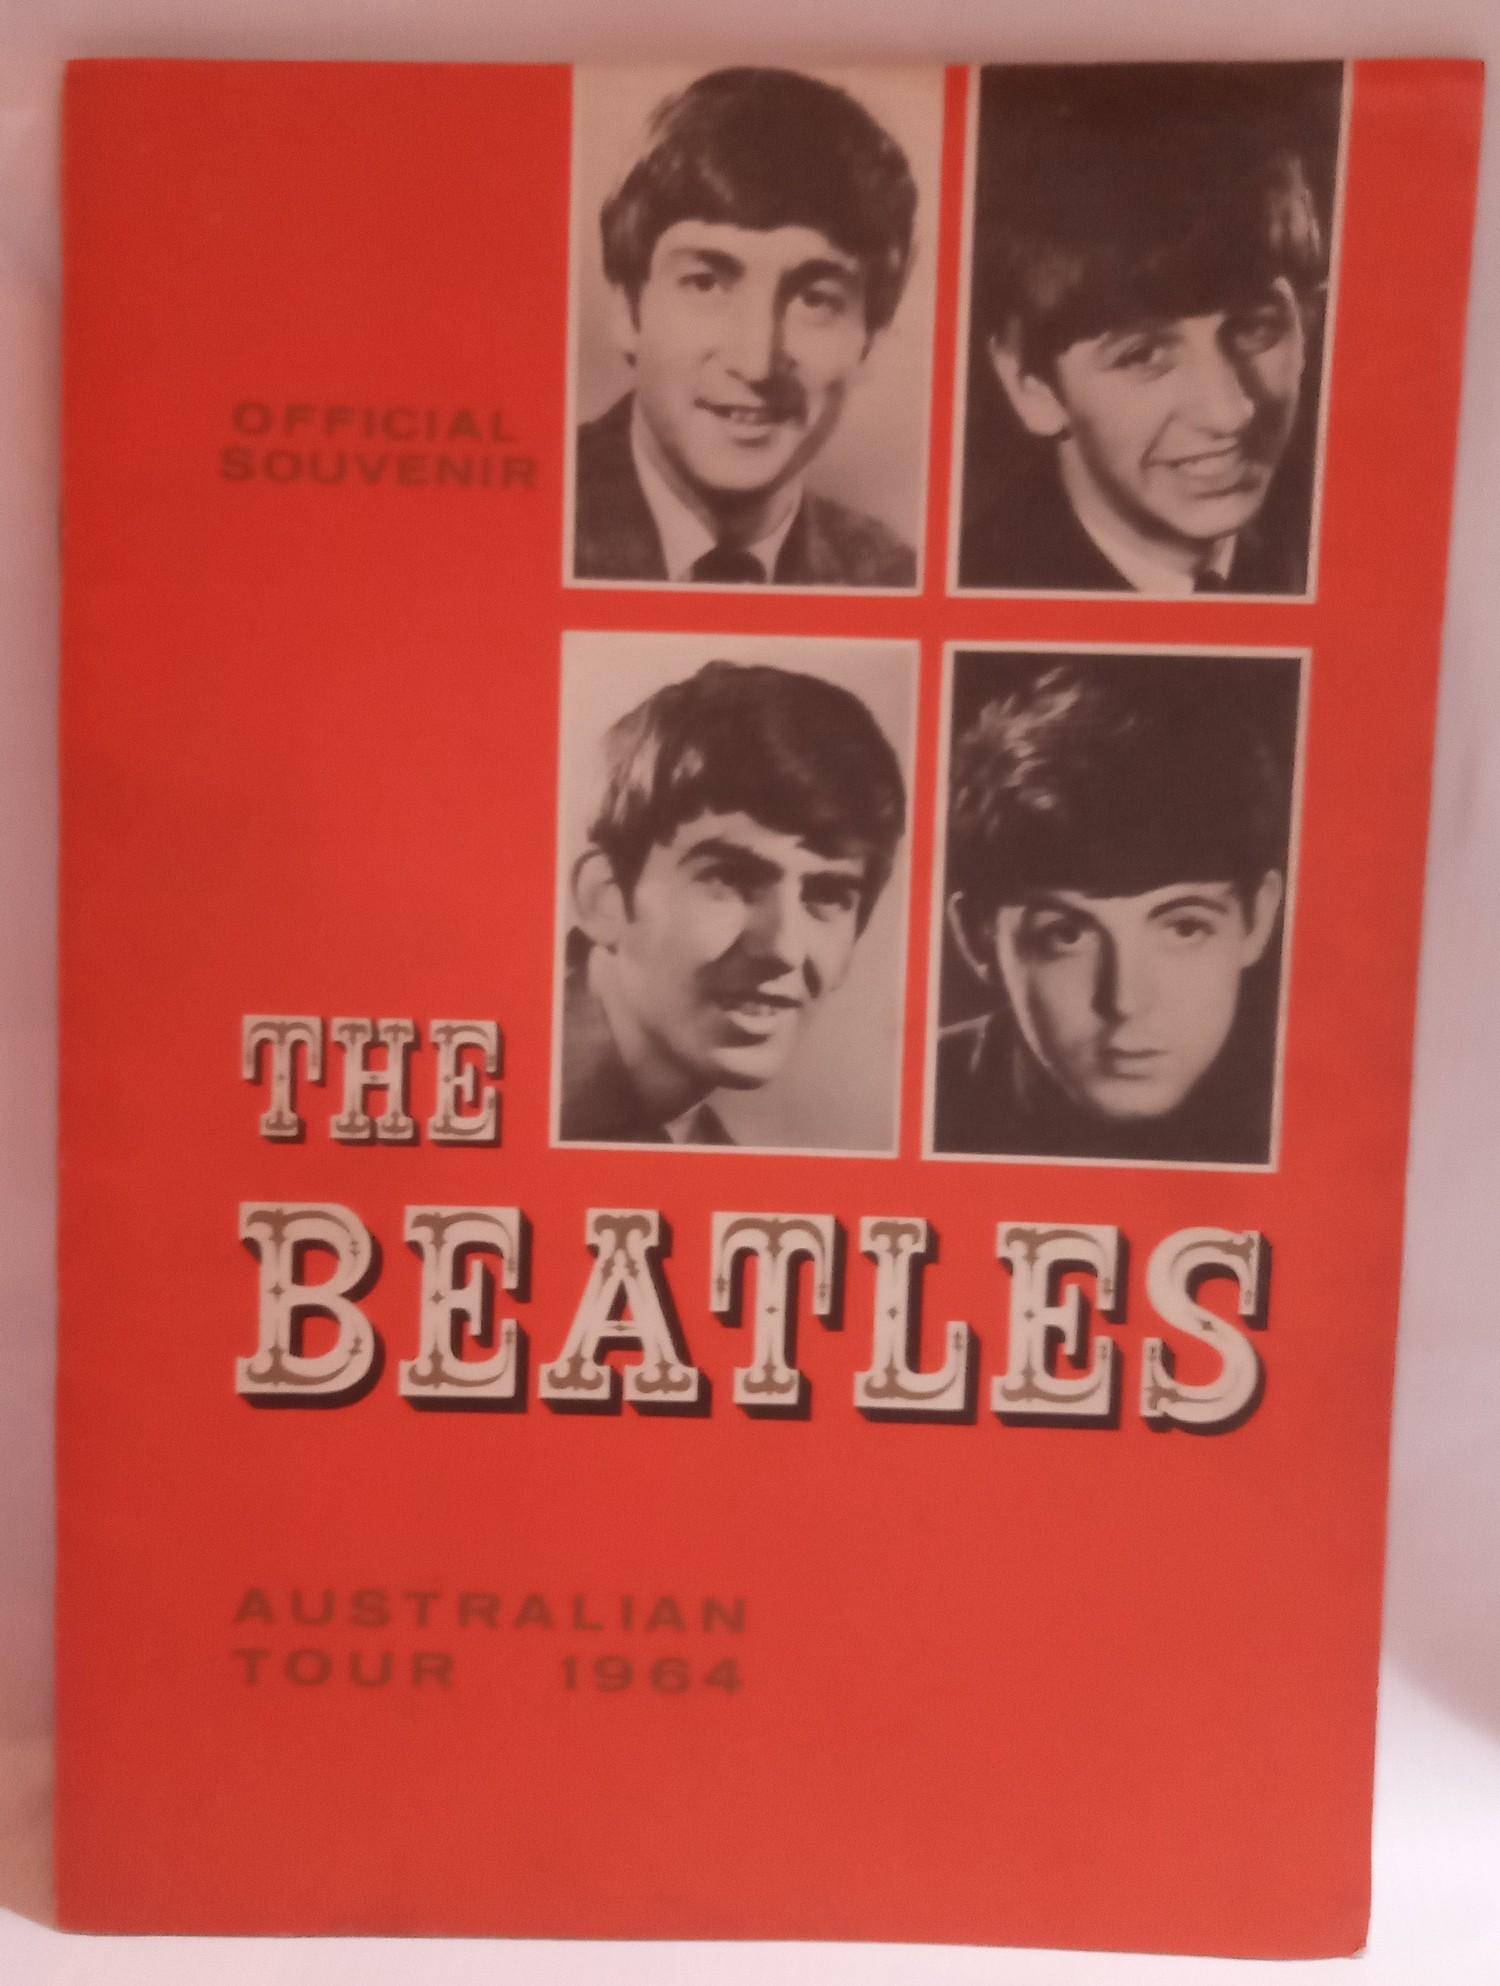 Tour the Beatles Australian Tour Programme. This took place from 12th June to 30th June 1964